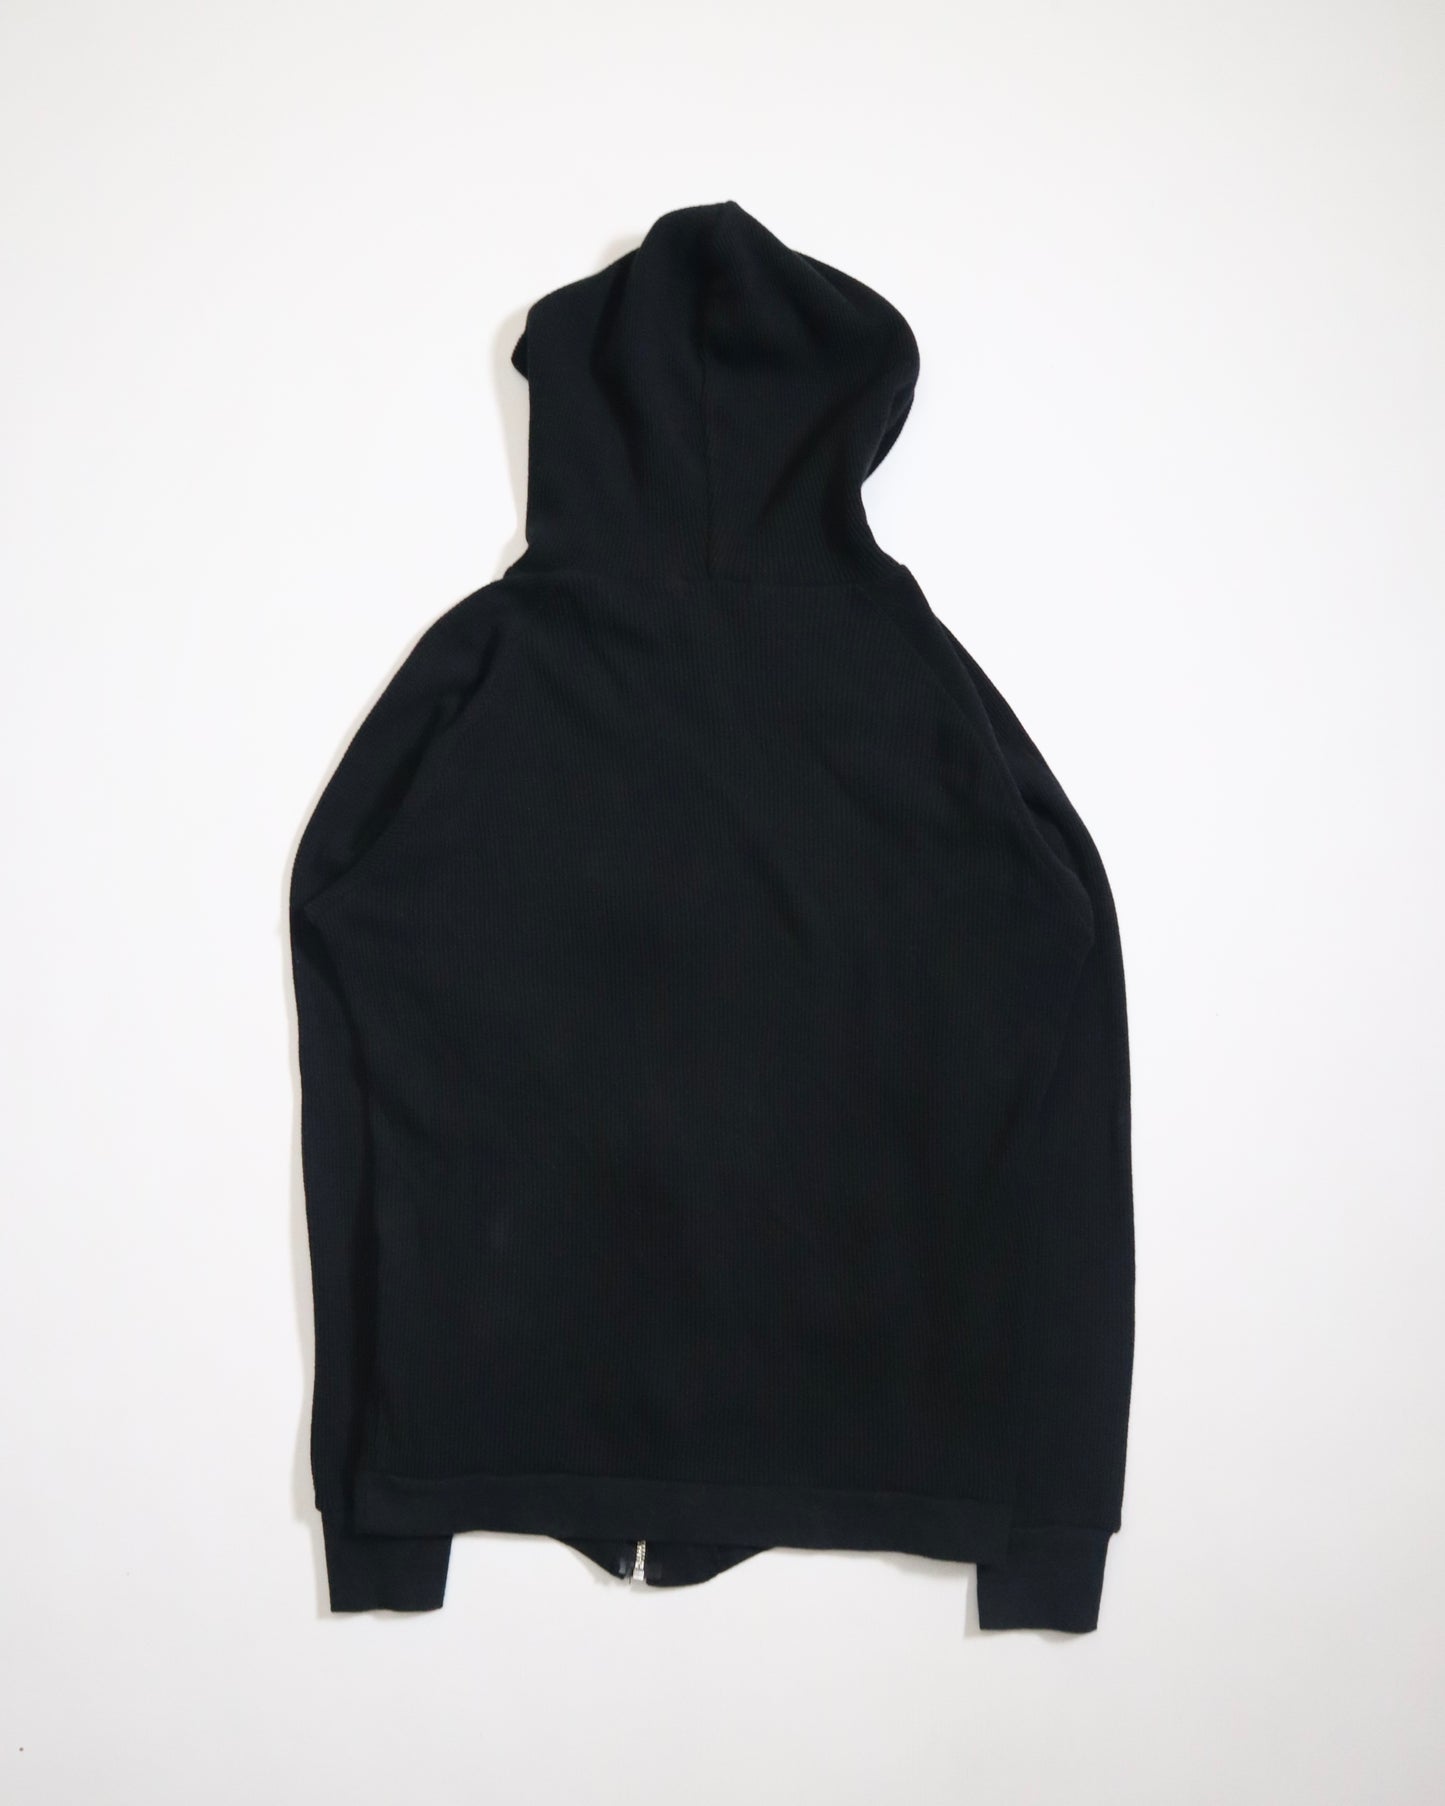 Undercover AW 09 Double-Zip Thermal Hoodie